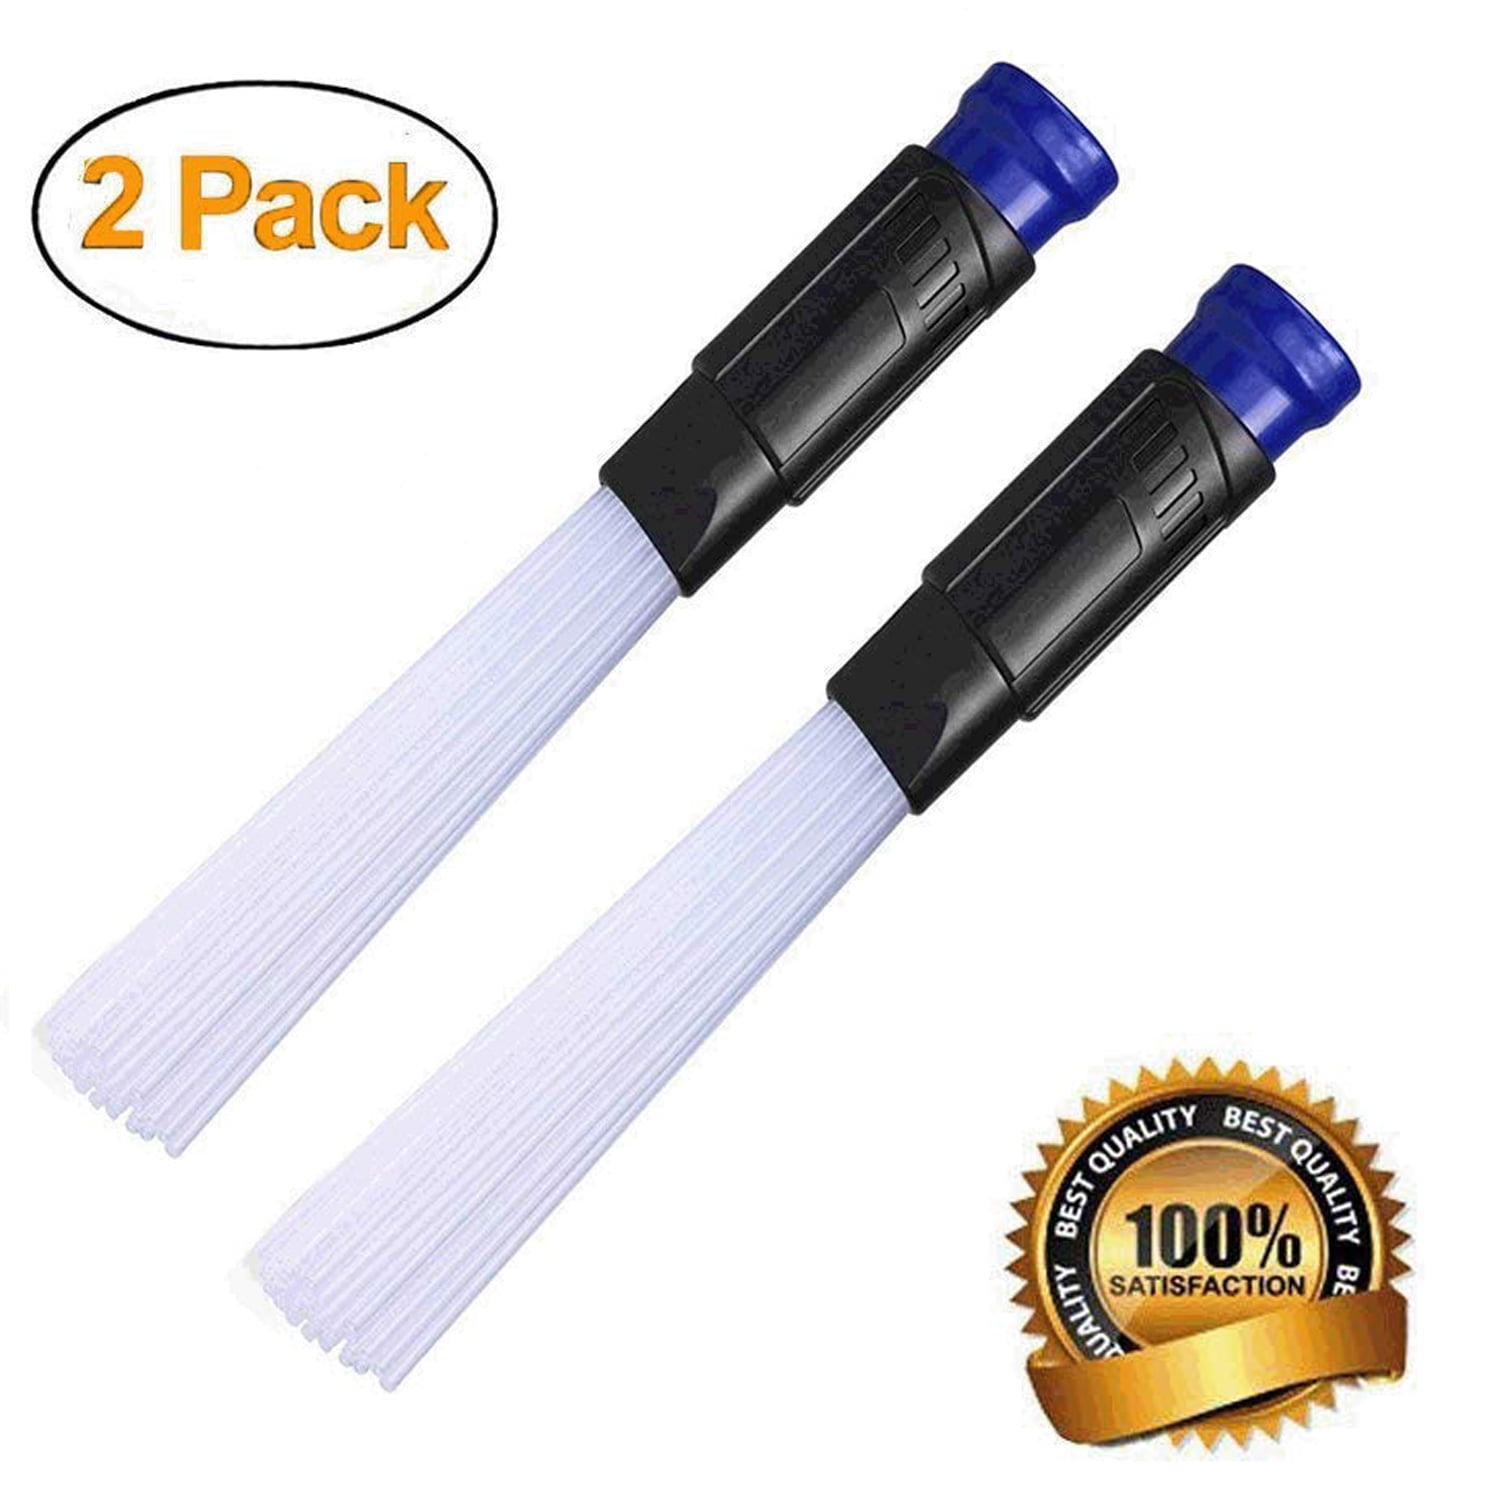 Brush Cleaner Dust Remover Universal Vacuum Attachment As Seen On TV for Air Vents/Keyboards/Drawers/Car/Tools/Crafts/Jewelry/Plants Etc blue Dust Brush Cleaner Vacuum 